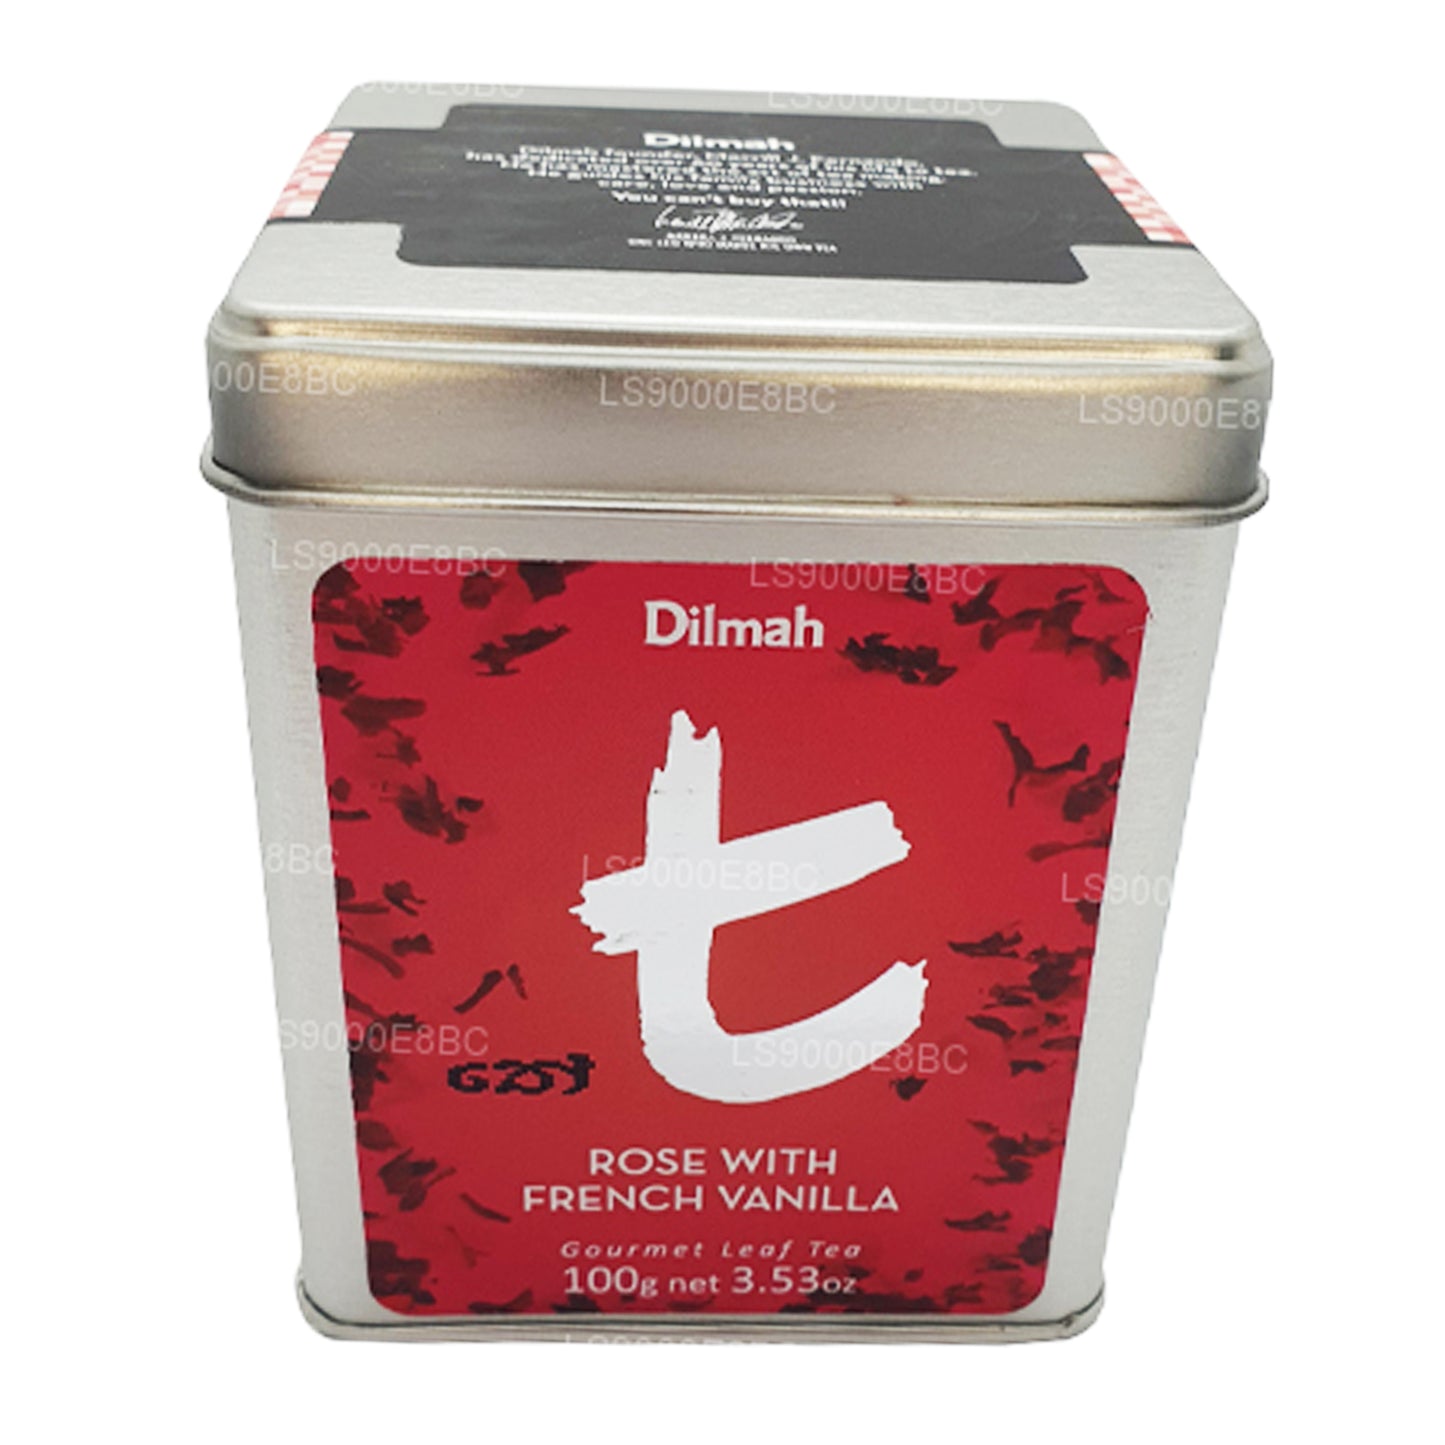 Dilmah t-Series Rose with French Vanilla Loose Leaf Tea (100g)